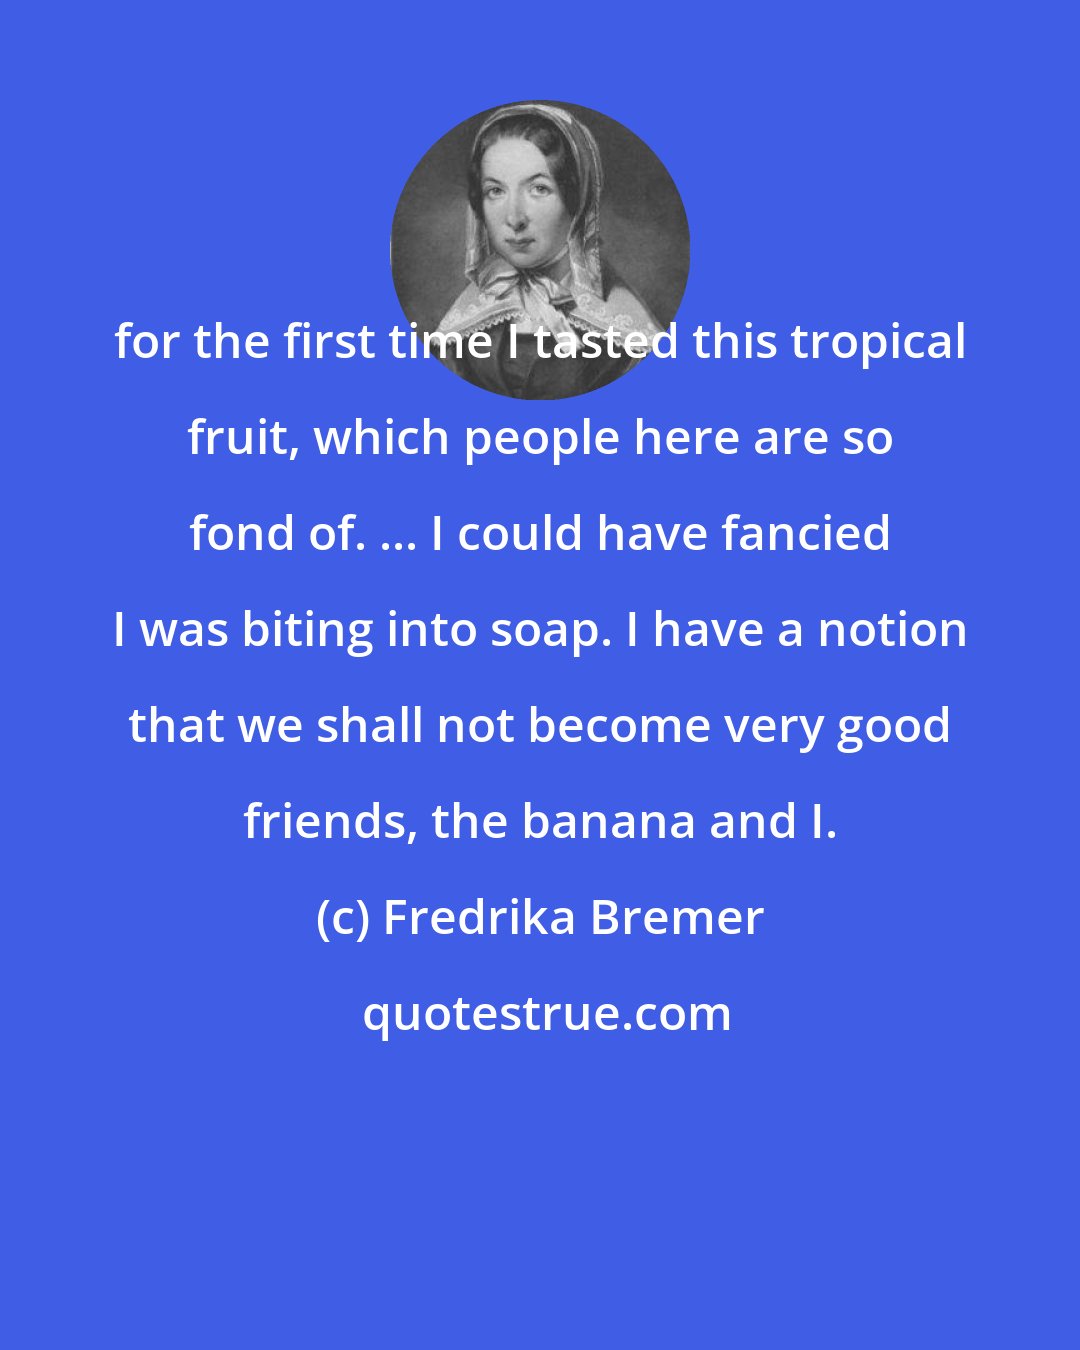 Fredrika Bremer: for the first time I tasted this tropical fruit, which people here are so fond of. ... I could have fancied I was biting into soap. I have a notion that we shall not become very good friends, the banana and I.